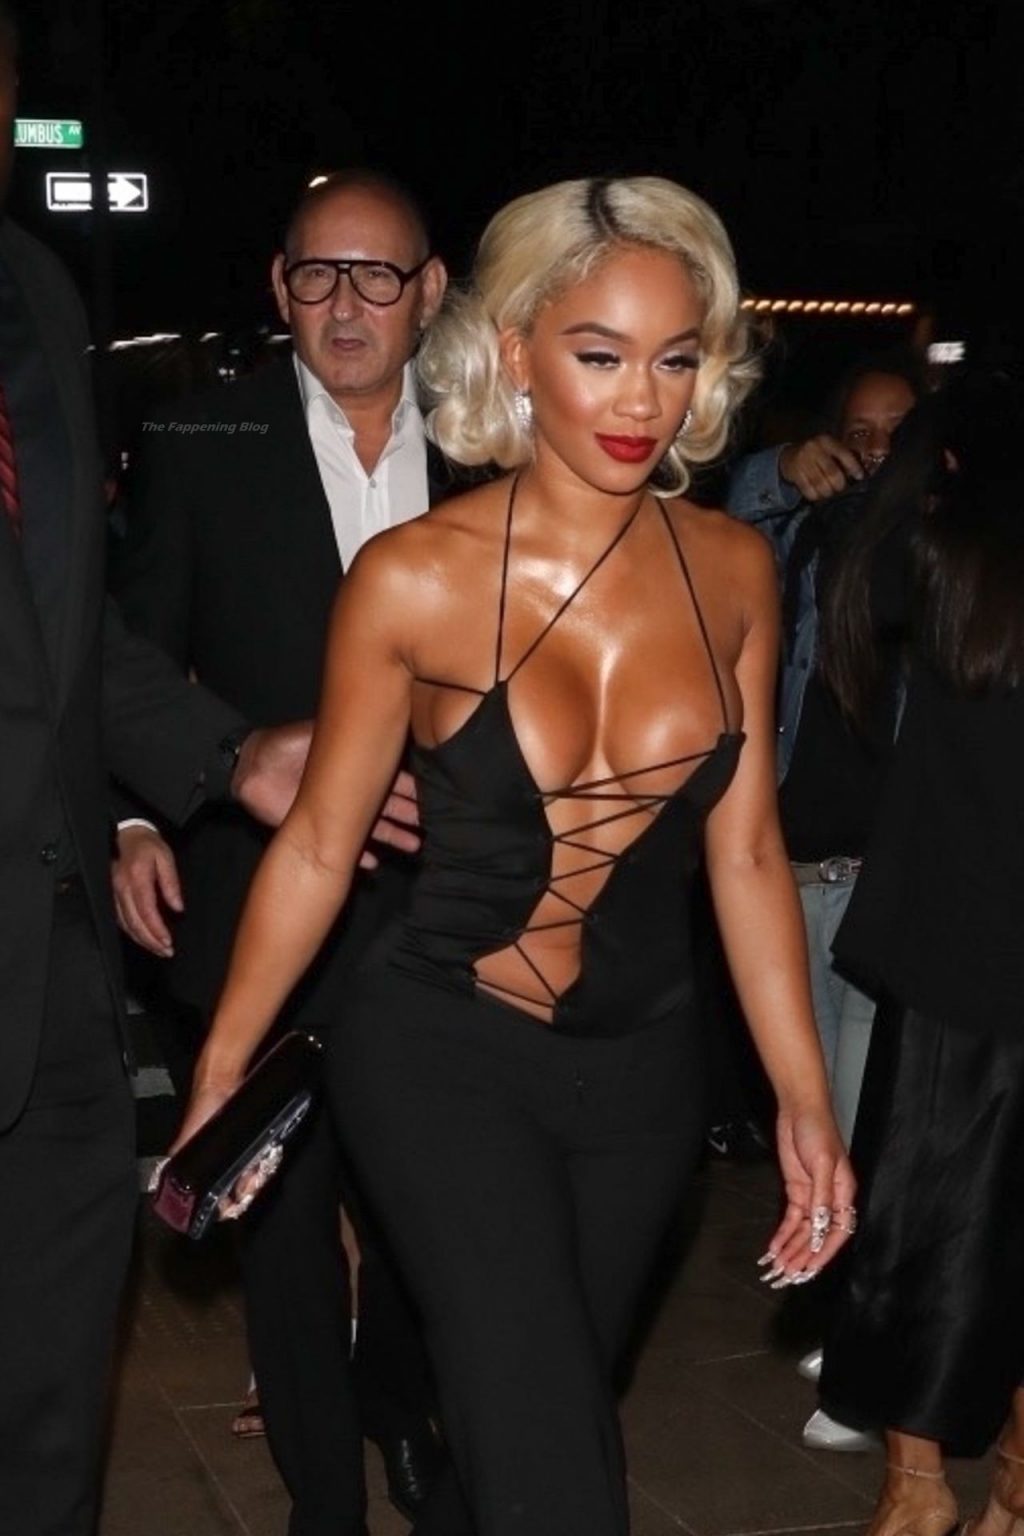 Saweetie Shows Off Her Boobs in a Lace-Up Barely There Blouse at the Tom Ford Fashion Show (37 Photos)